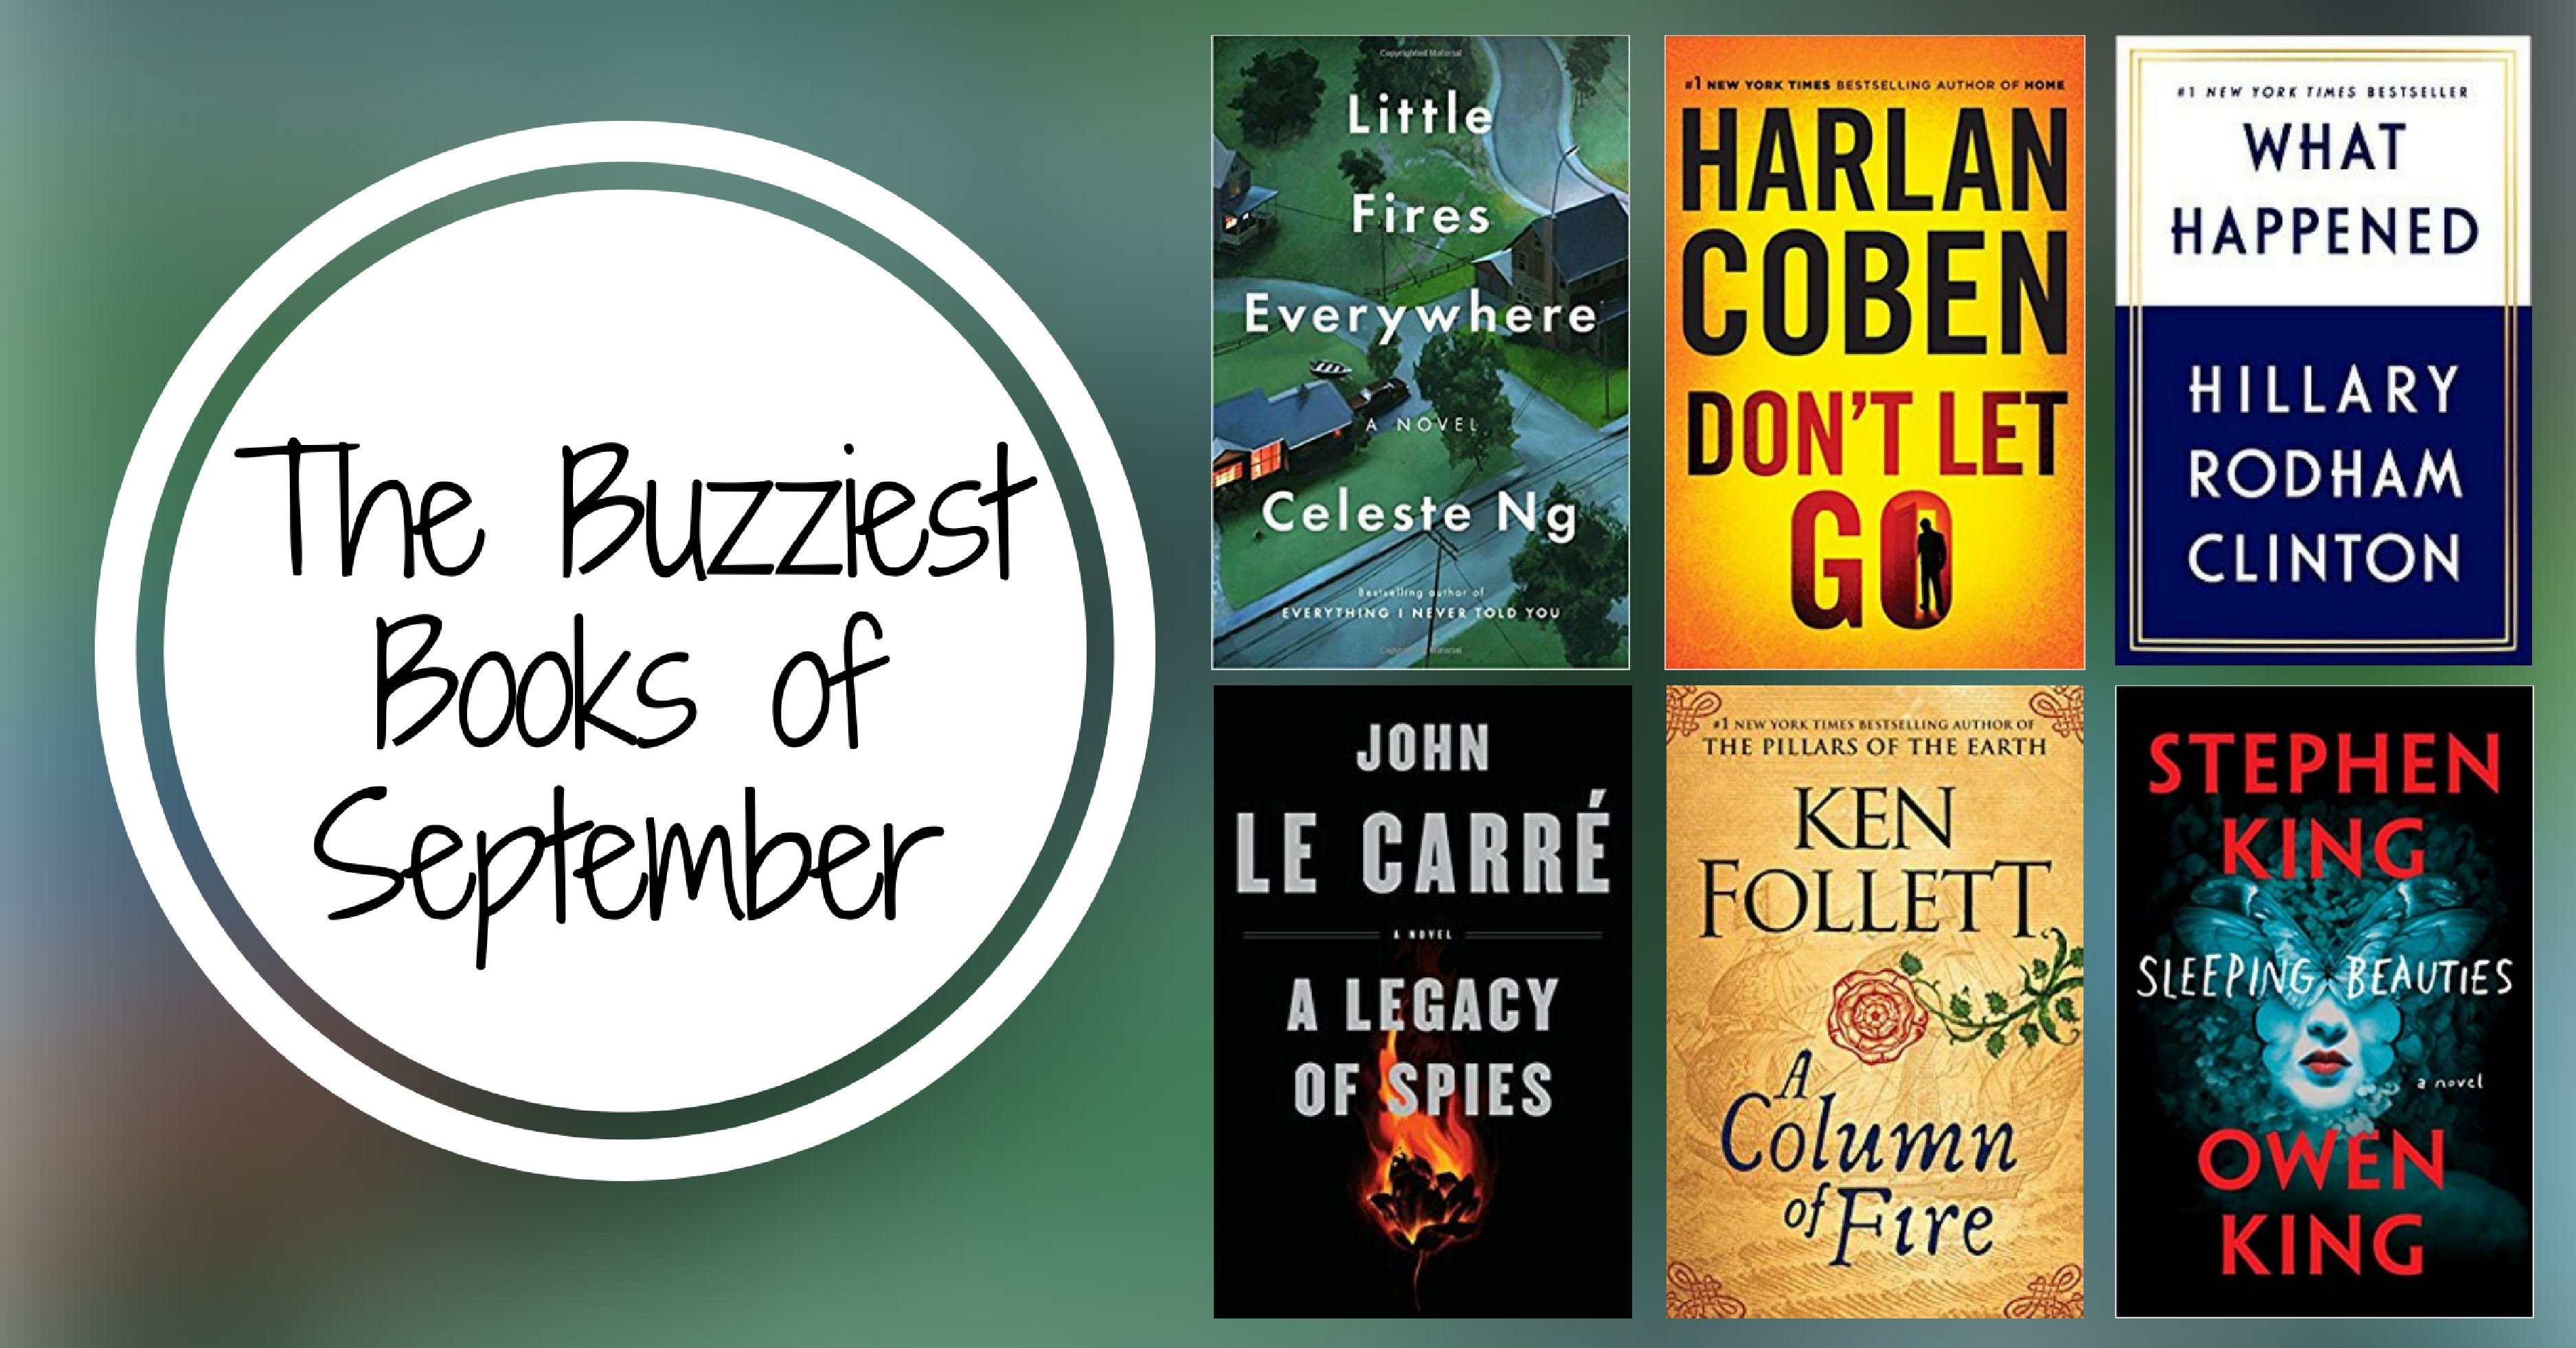 The Buzziest Books of September